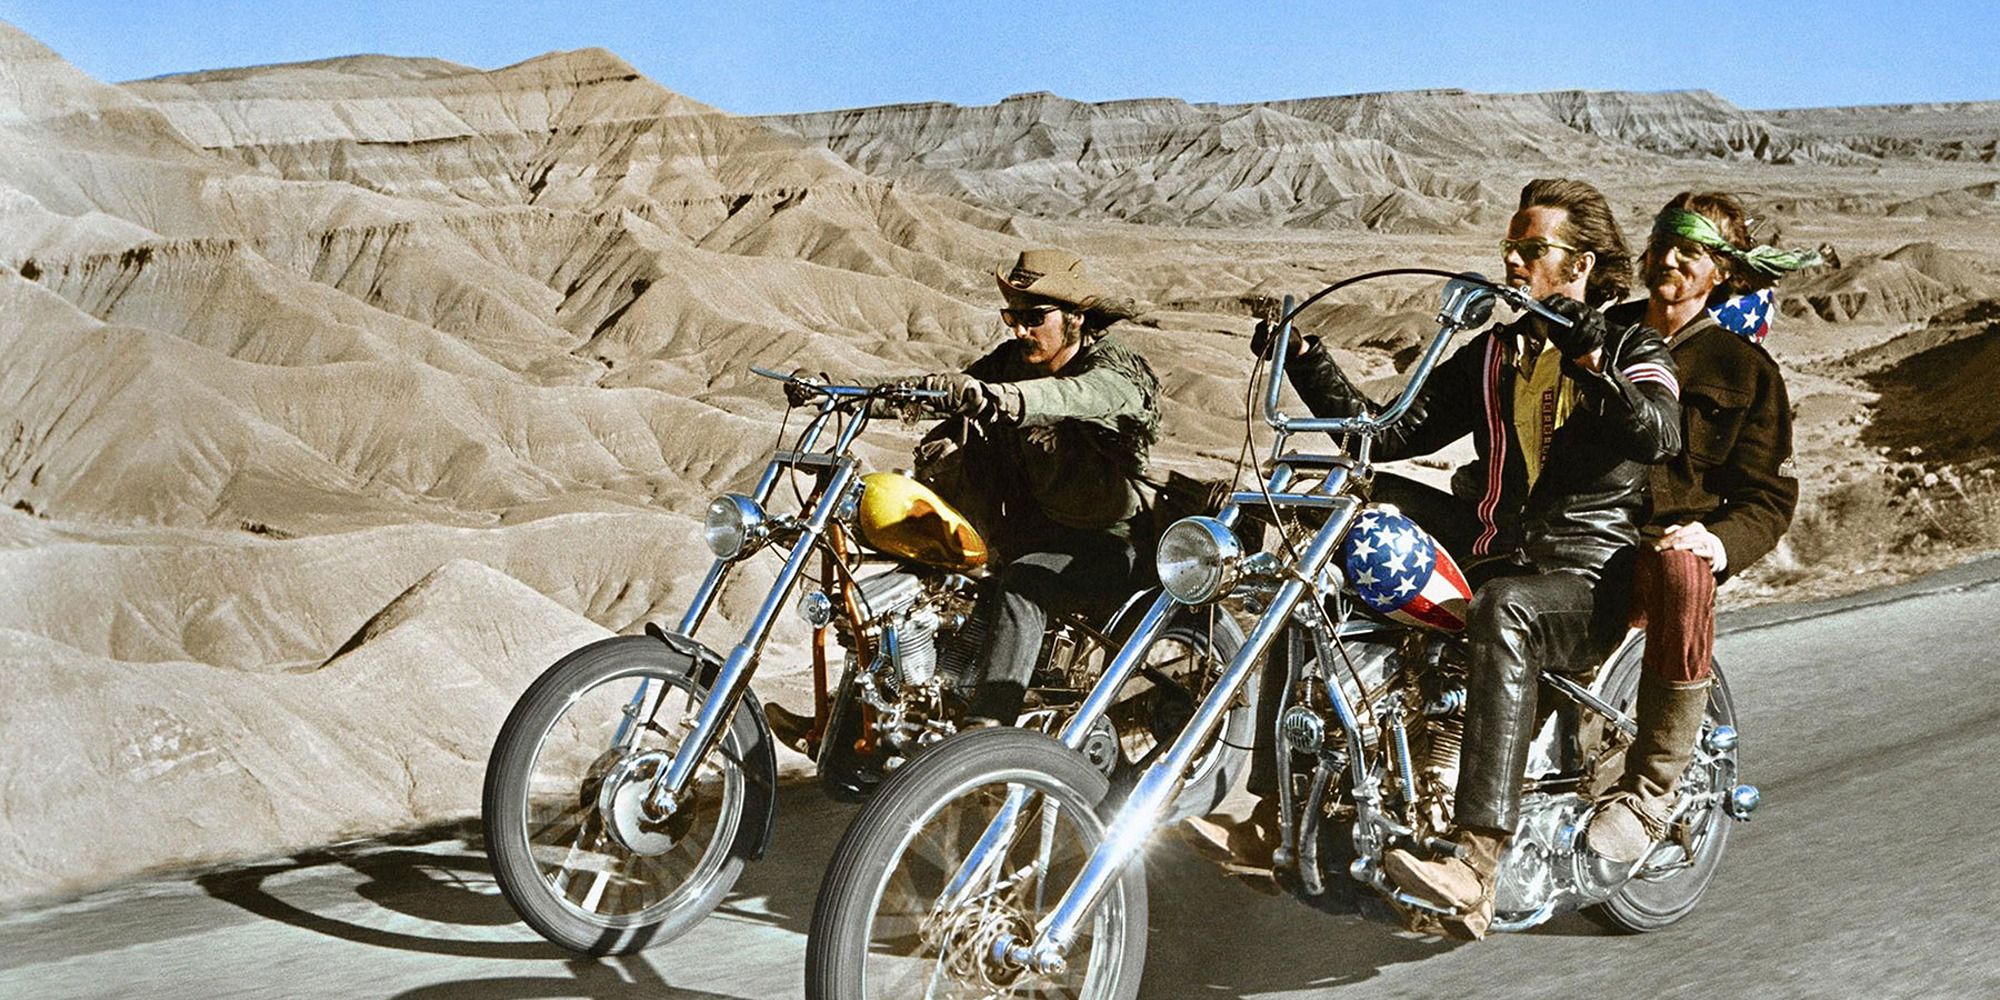 Men on motorcycles on a highway in the southern US from Easy Rider